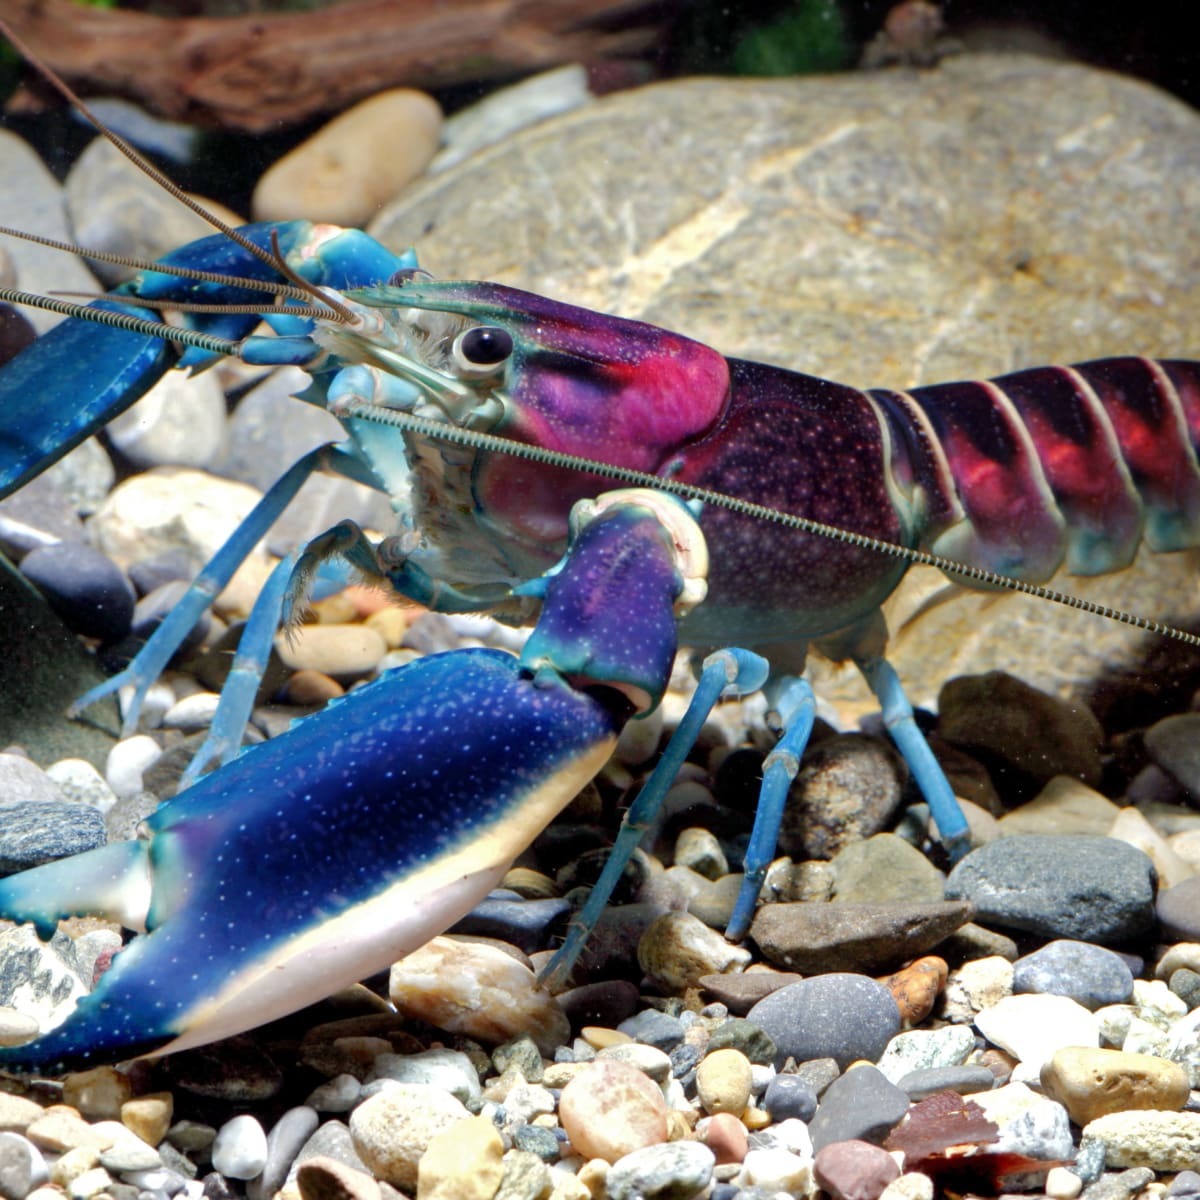 Colorful crayfish identified as new species that needs saving